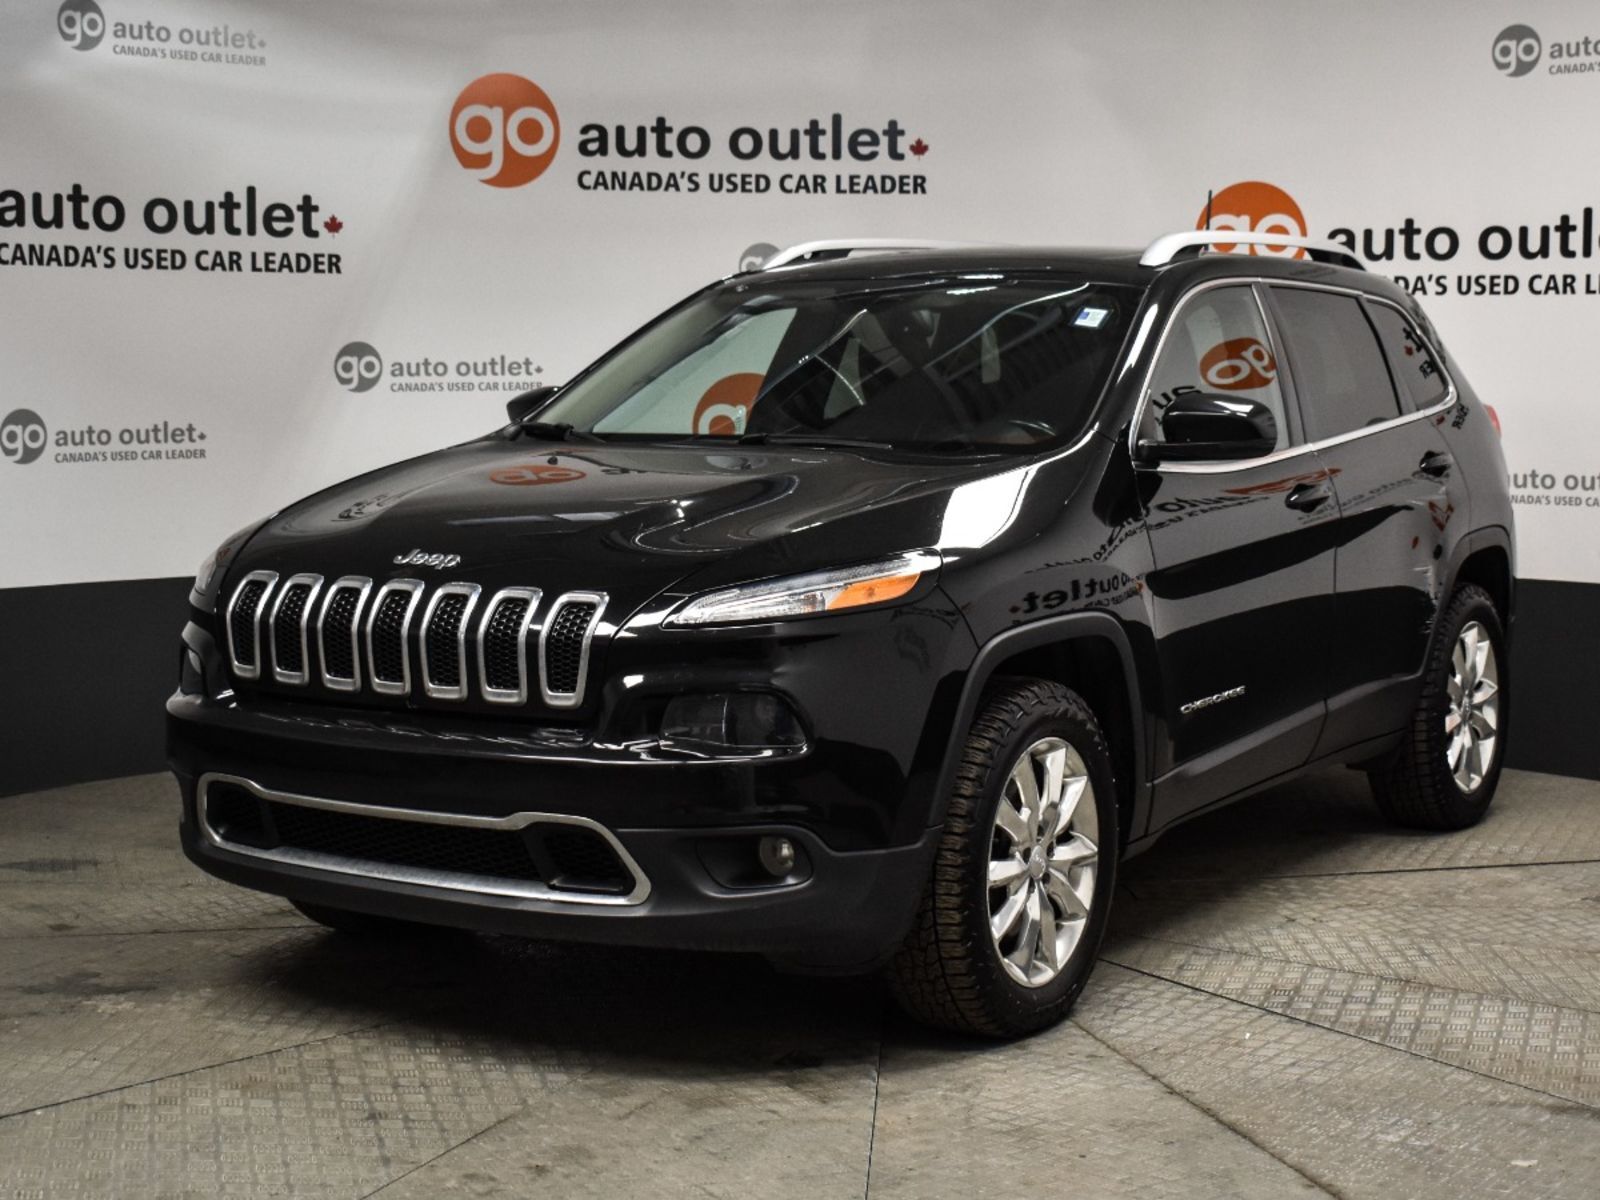 2017 Jeep Cherokee Limited 4WD Pano Sunroof, Heated/Cooled Seats